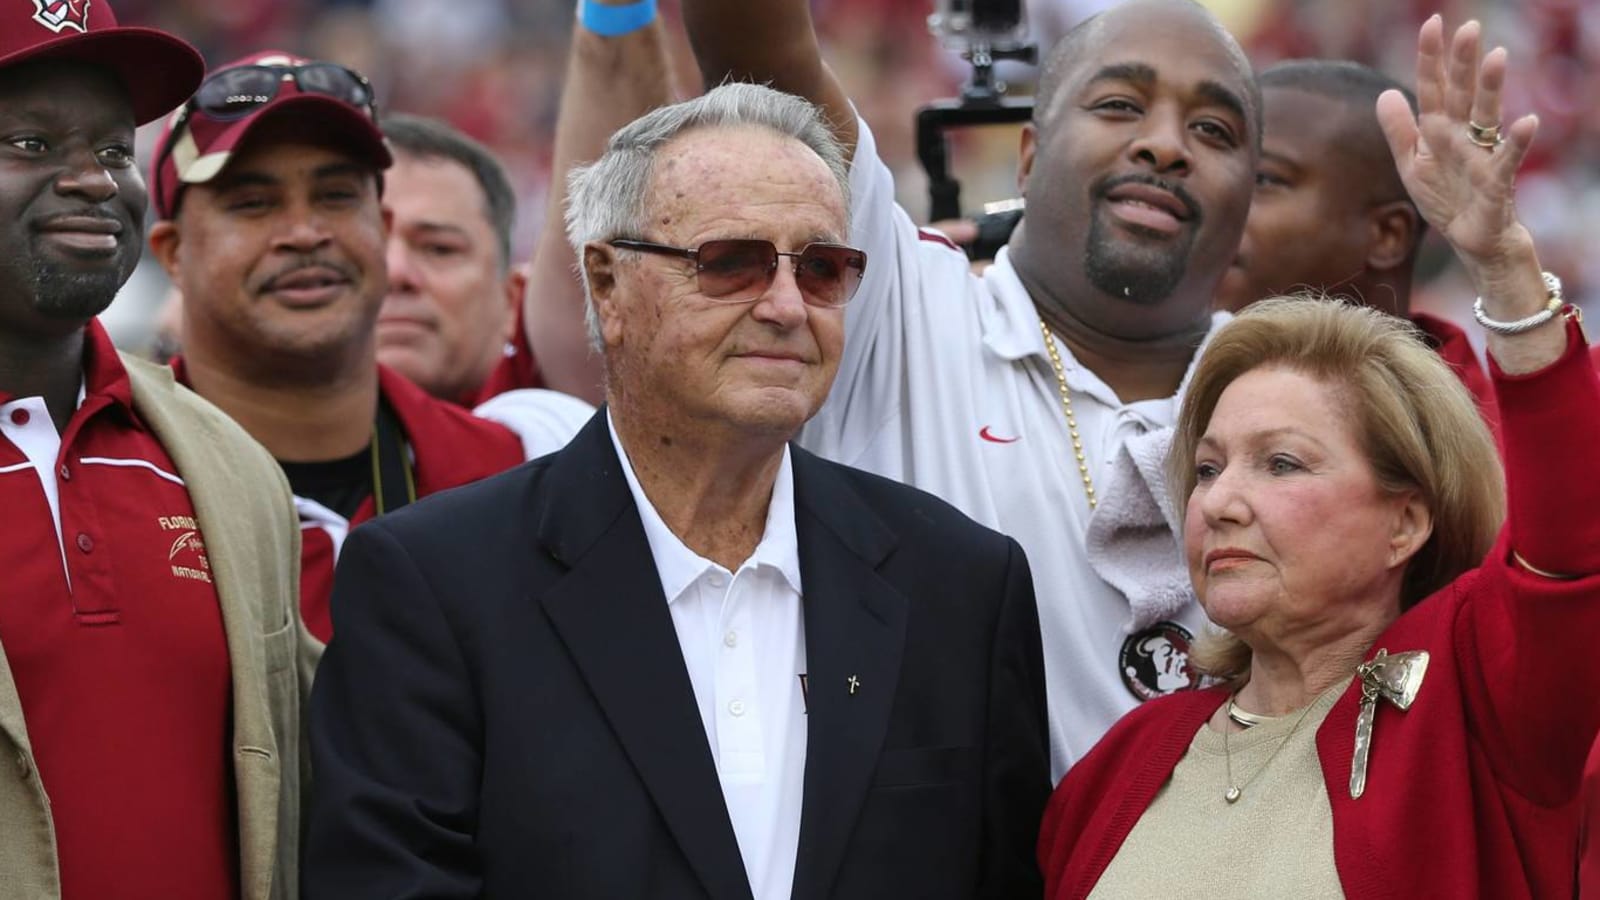 Bobby Bowden released from hospital after bout with COVID-19